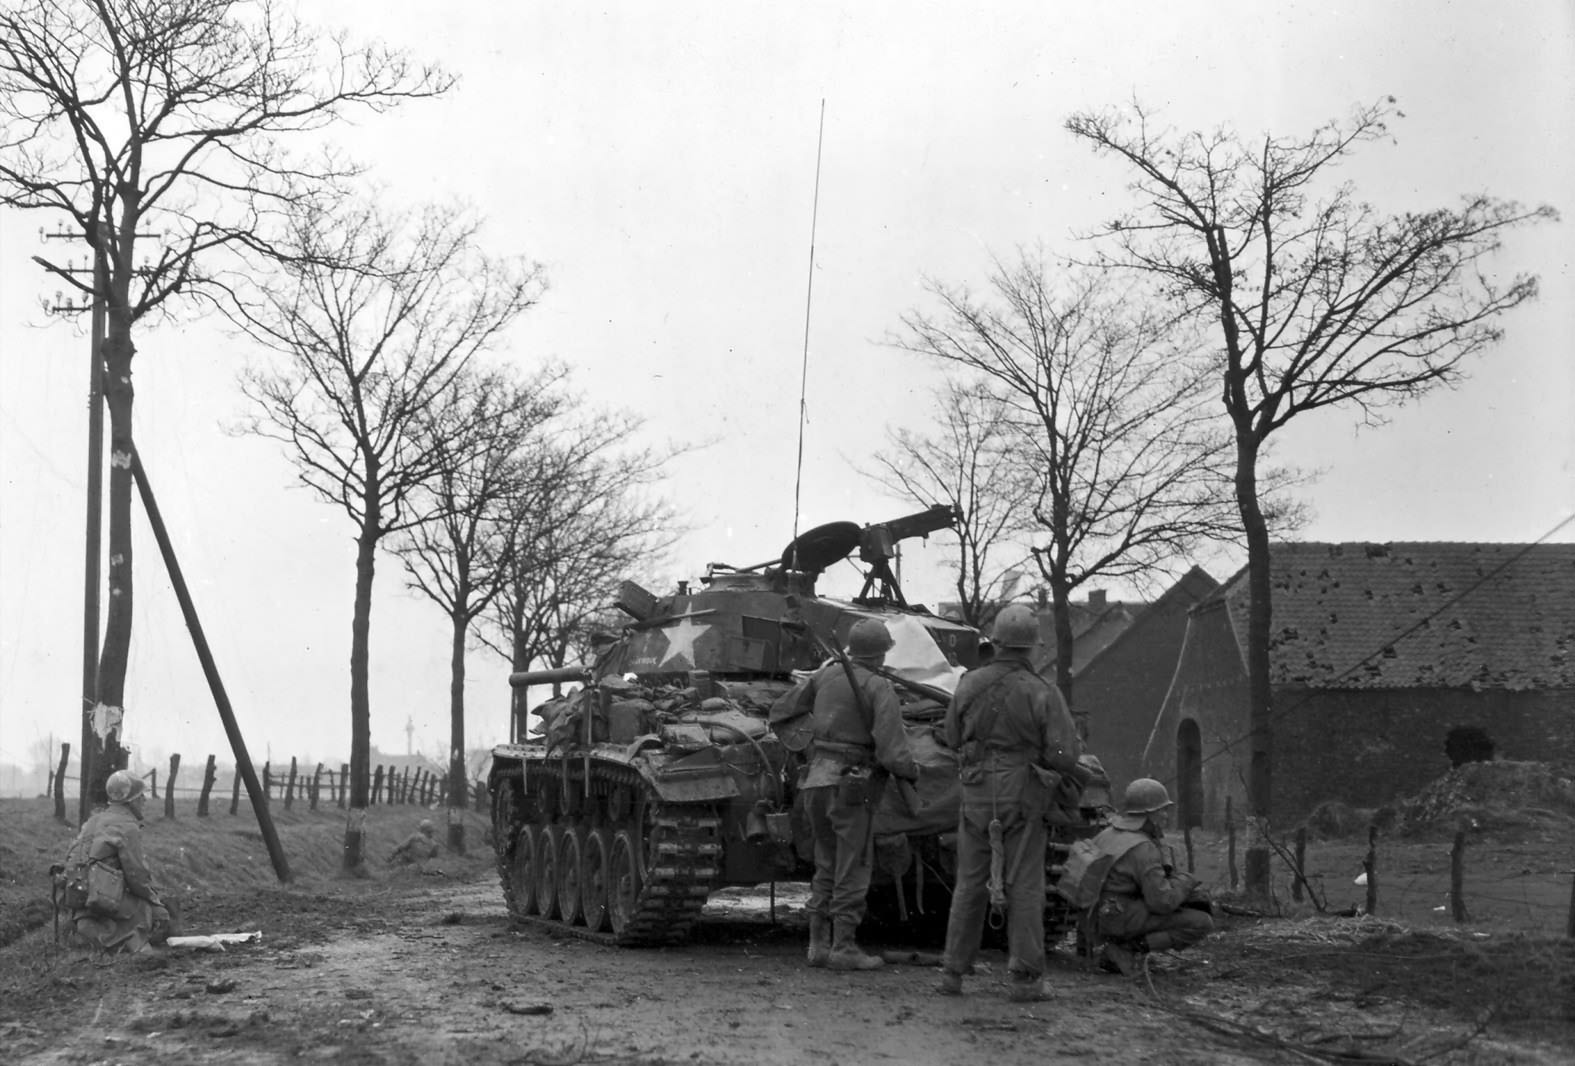 35th Infantry Division clearing Lintfort, Germany with M24 tank support